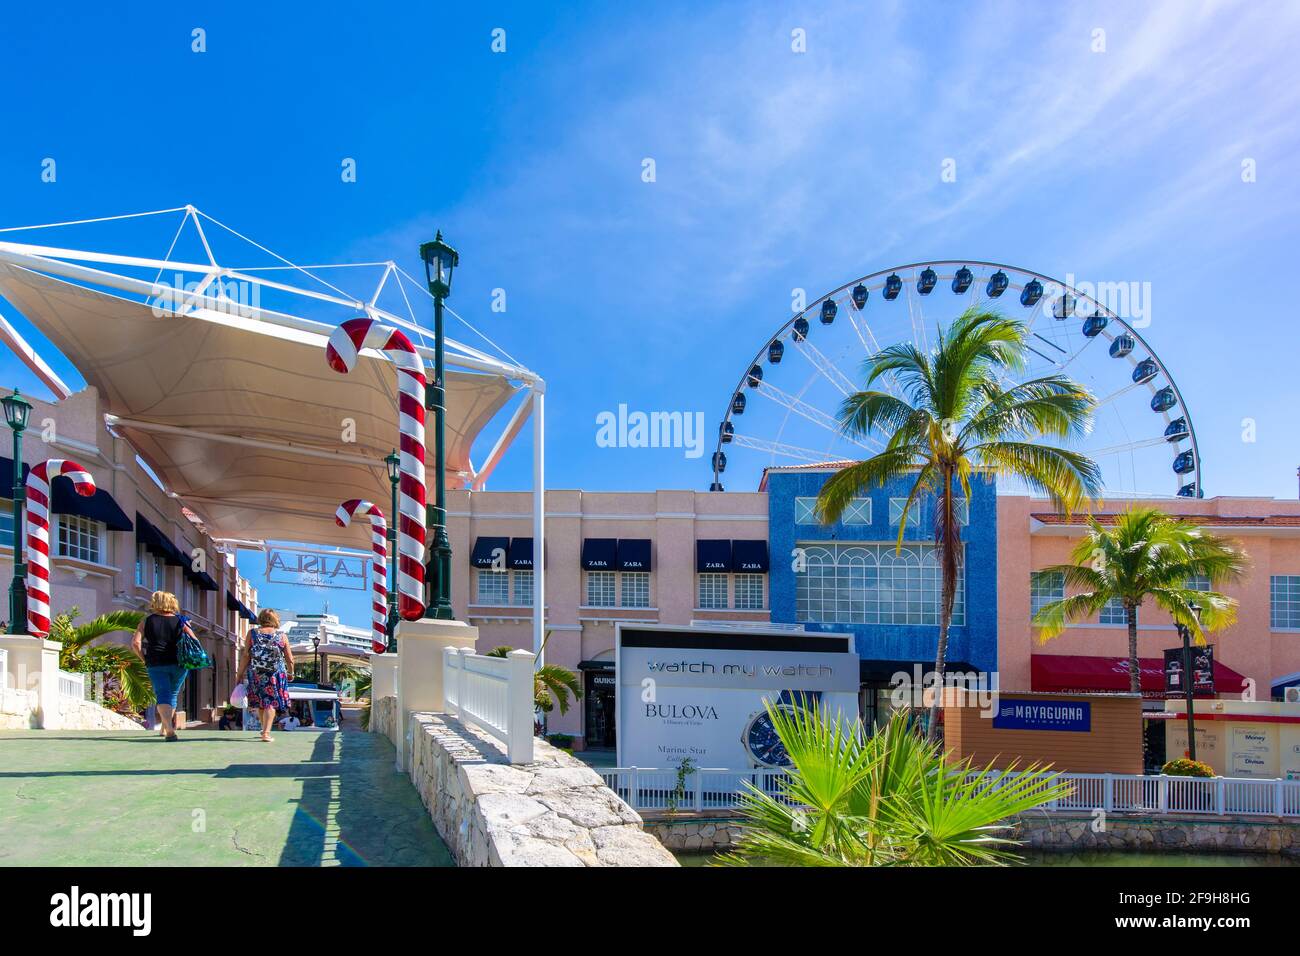 Cancun, Mexico - 20 December, 2020: Biggest Cancun Shopping Mall La Isla  (The Island) that sells everything from souvenirs to brand name luxury  clothing. A home of Cancun Aquarium Stock Photo - Alamy